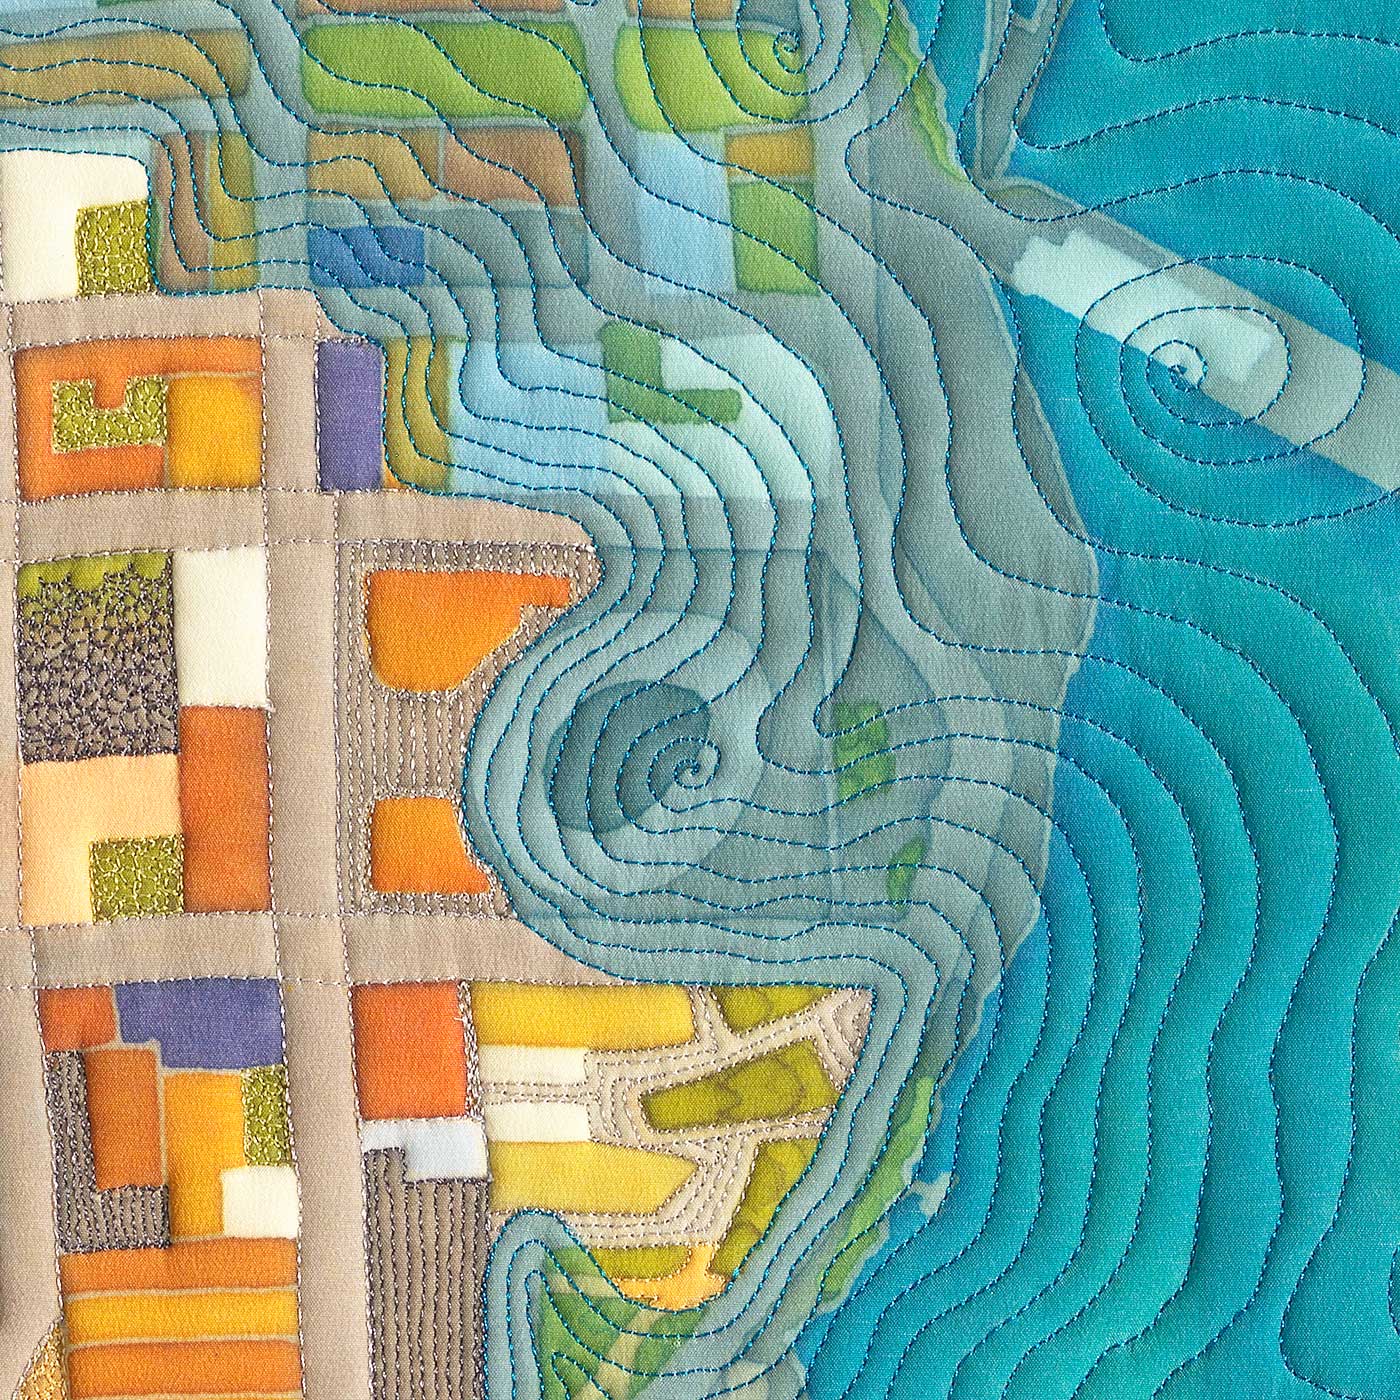 detail image of Dogpatch, the sea is rising: 0, 3 and 6 feet ©2019 Linda Gass